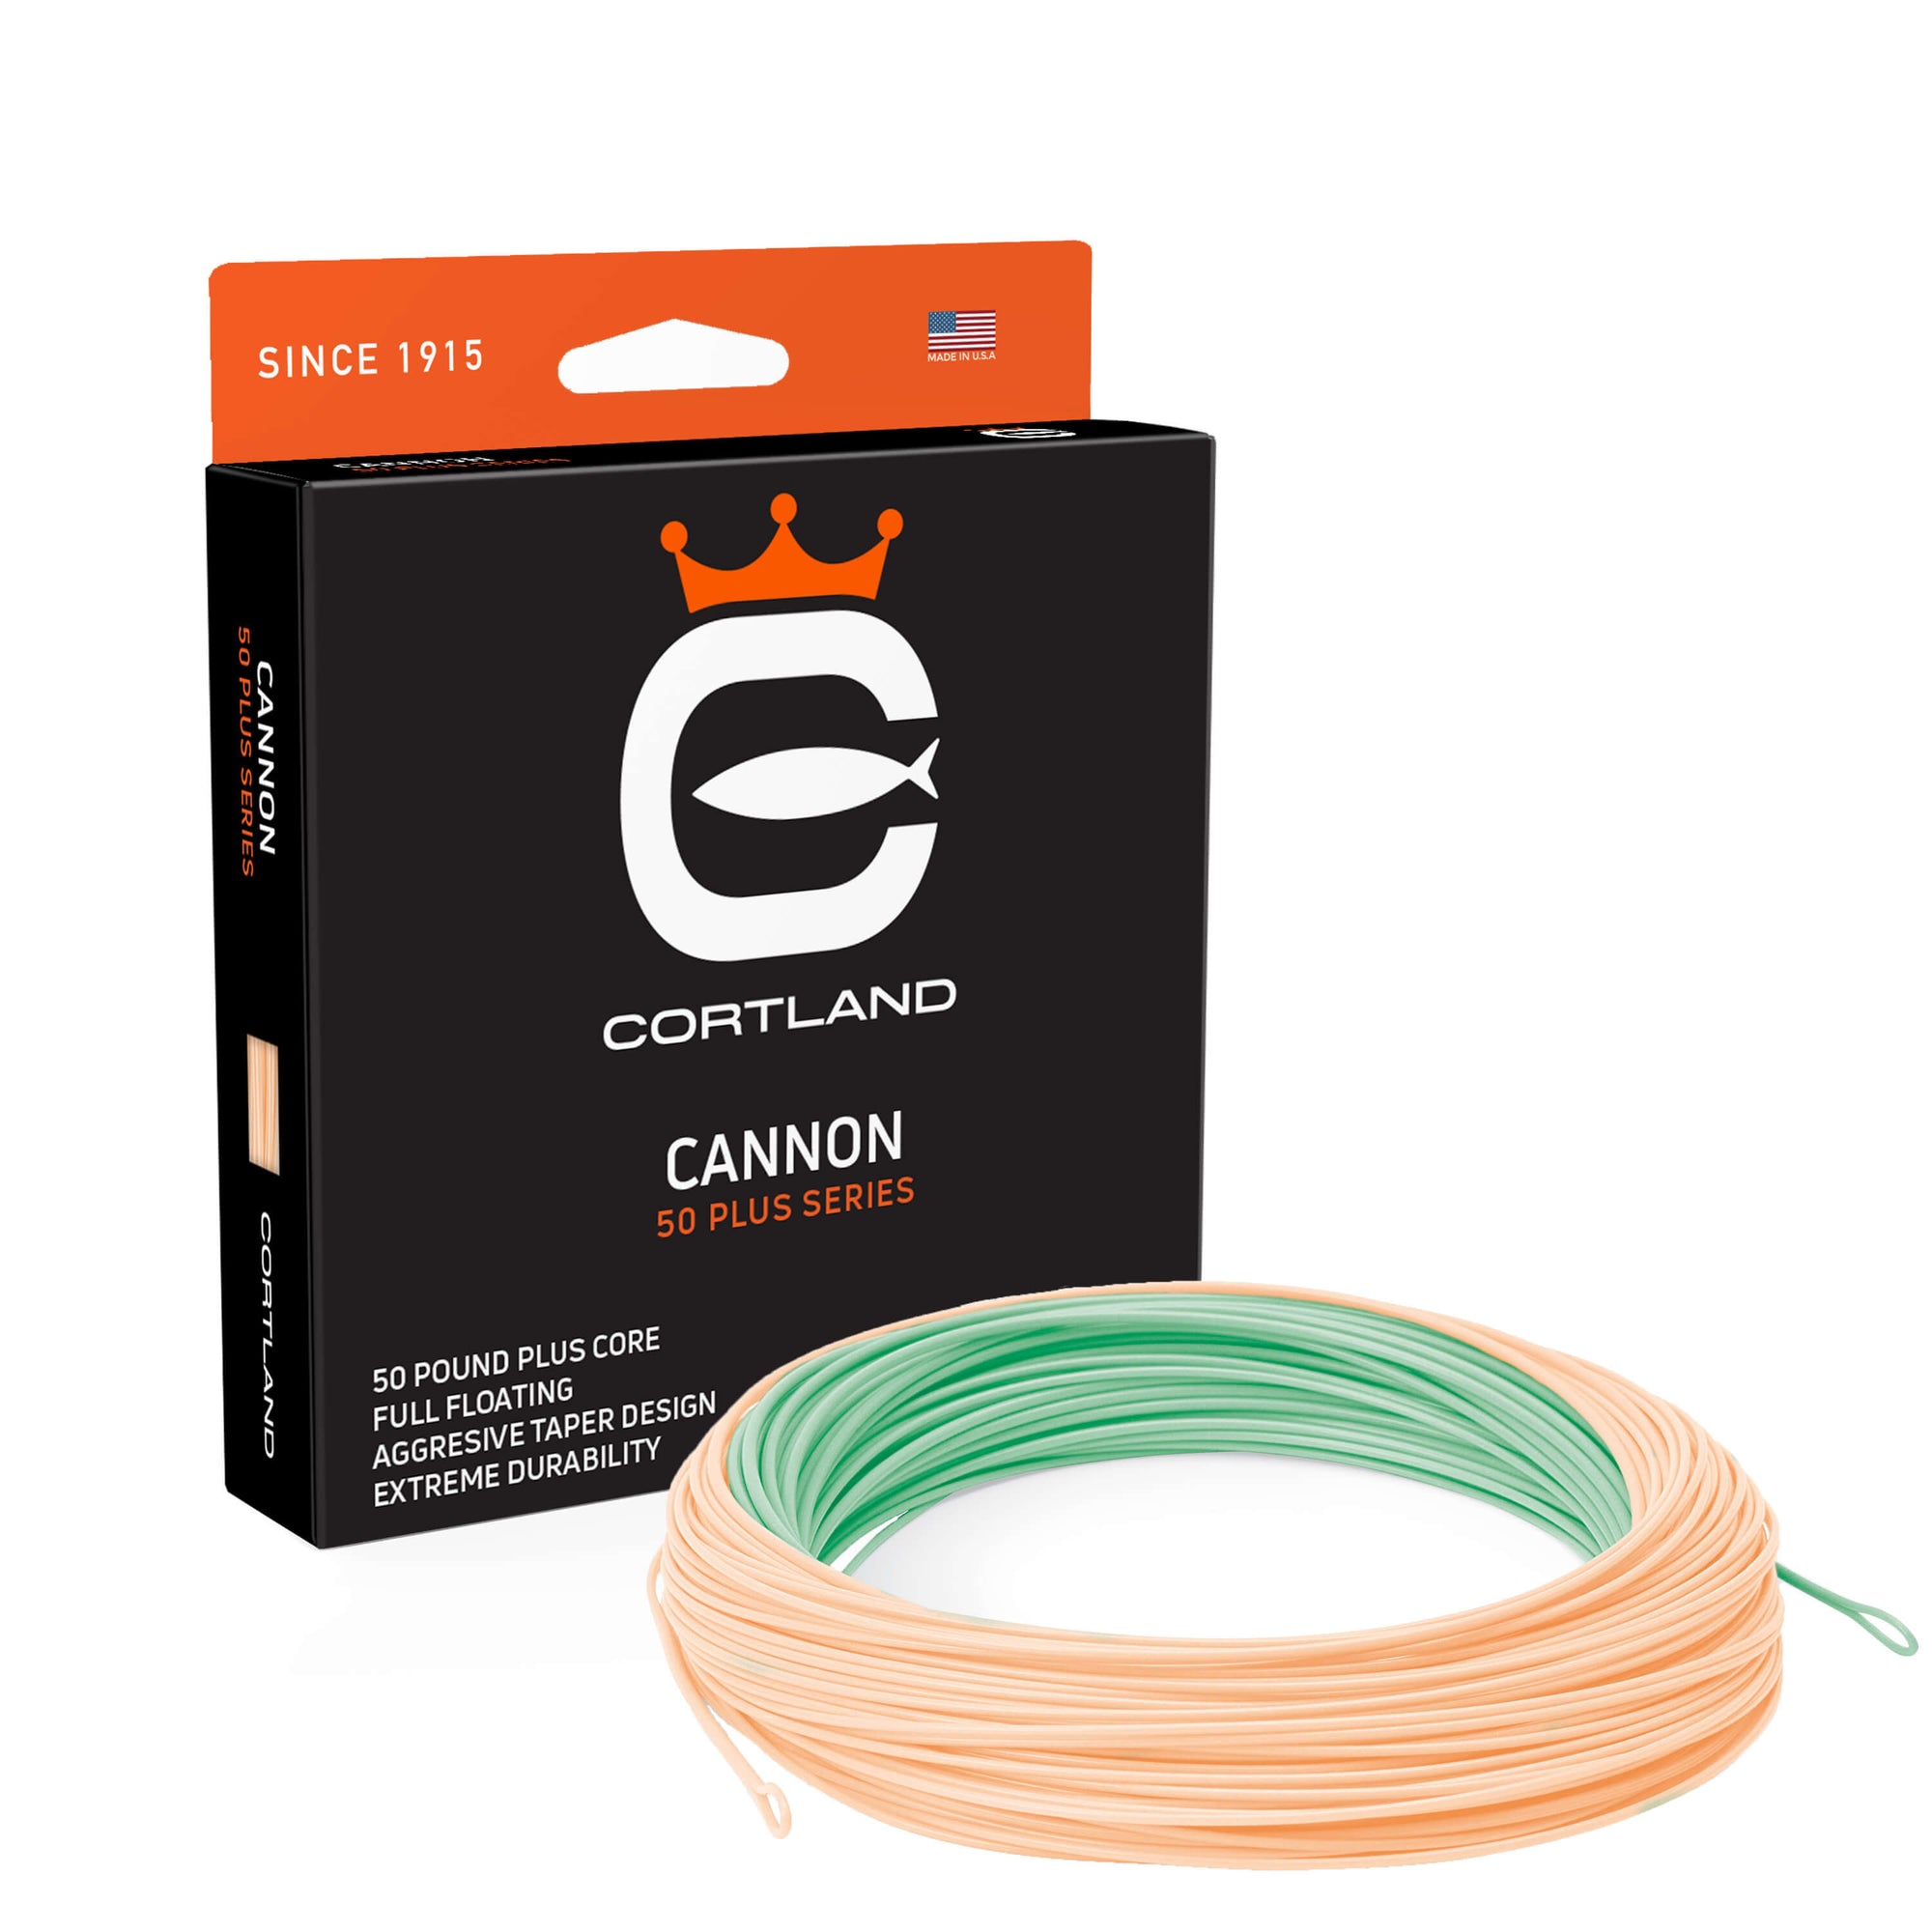 Cortland Line Company: The Best American Made Saltwater Fly Lines